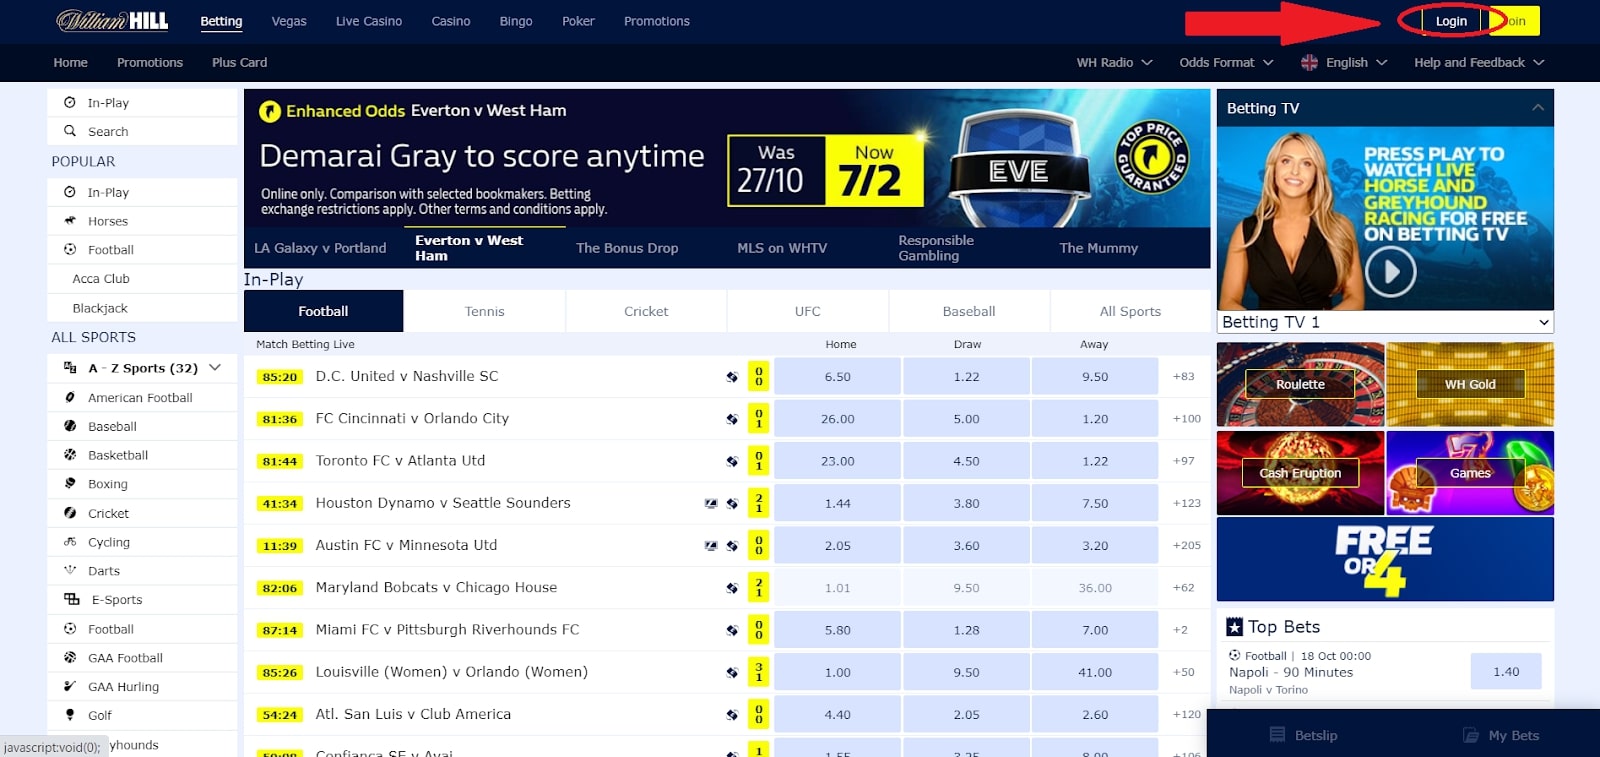 How to Place a Bet at William Hill | Your Step By Step Guide -